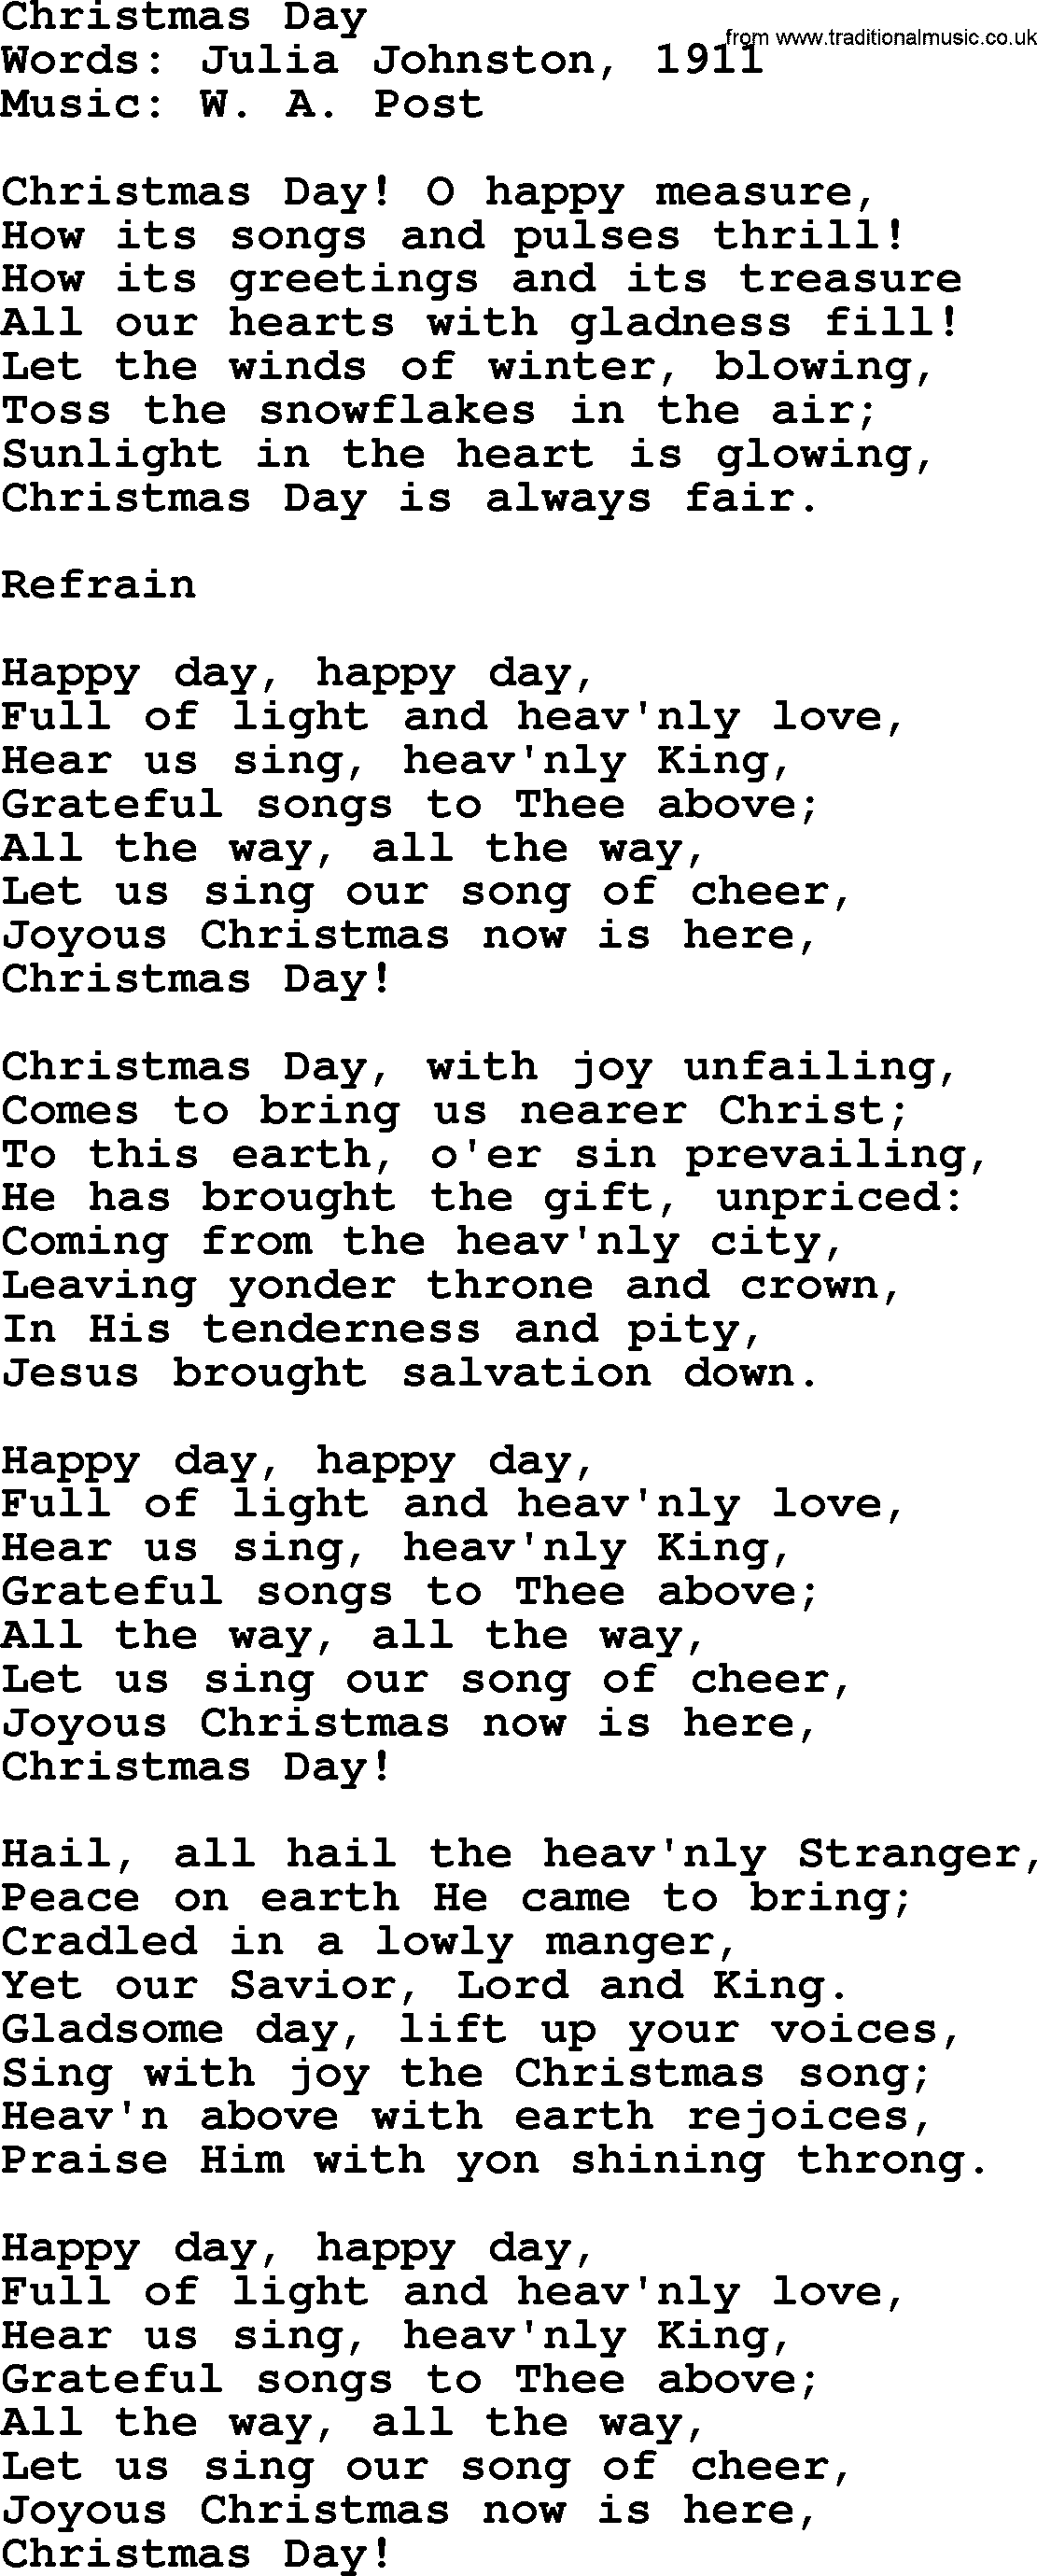 280 Christmas Hymns and songs with PowerPoints and PDF, title: Christmas Day, lyrics, PPT and PDF